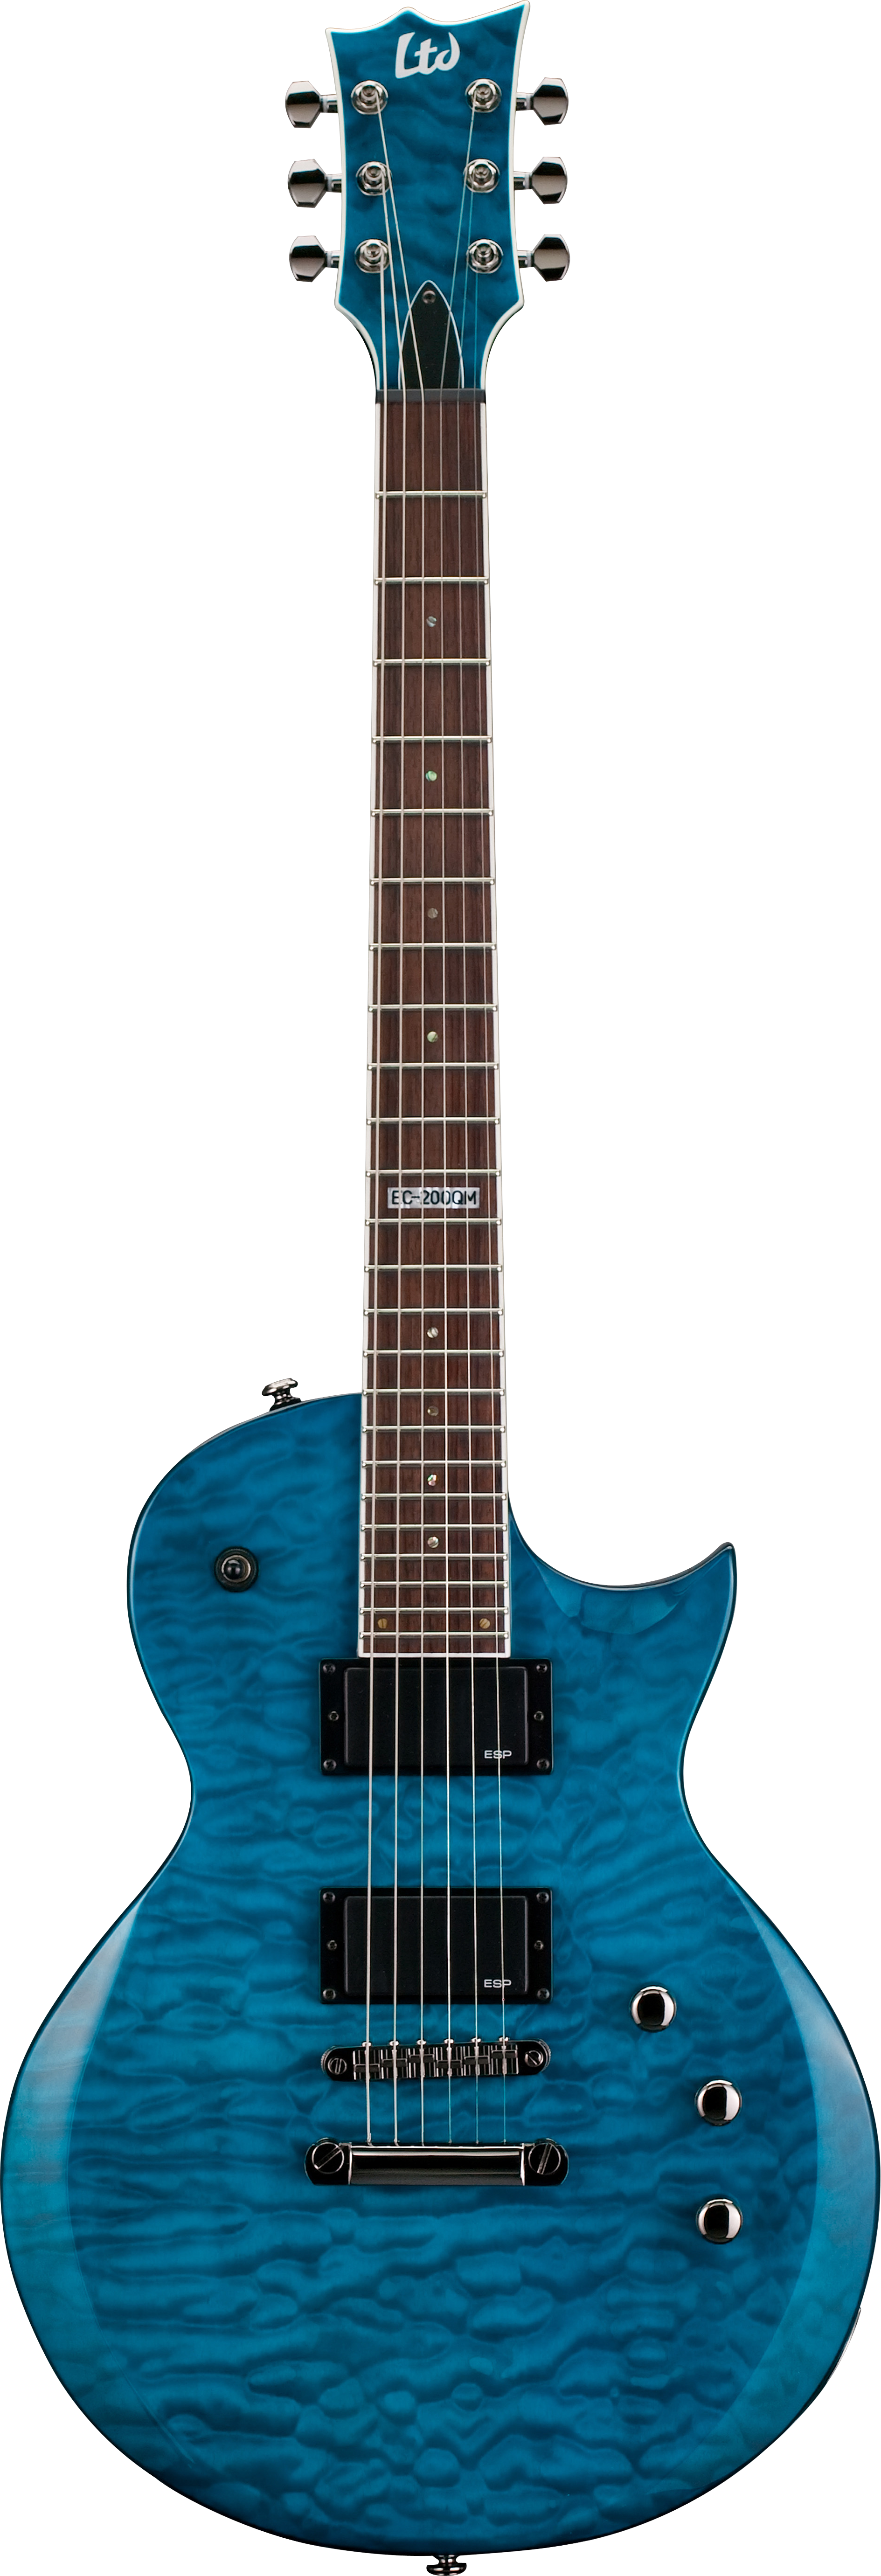 Download Blue Electric Guitar Png Image For Free